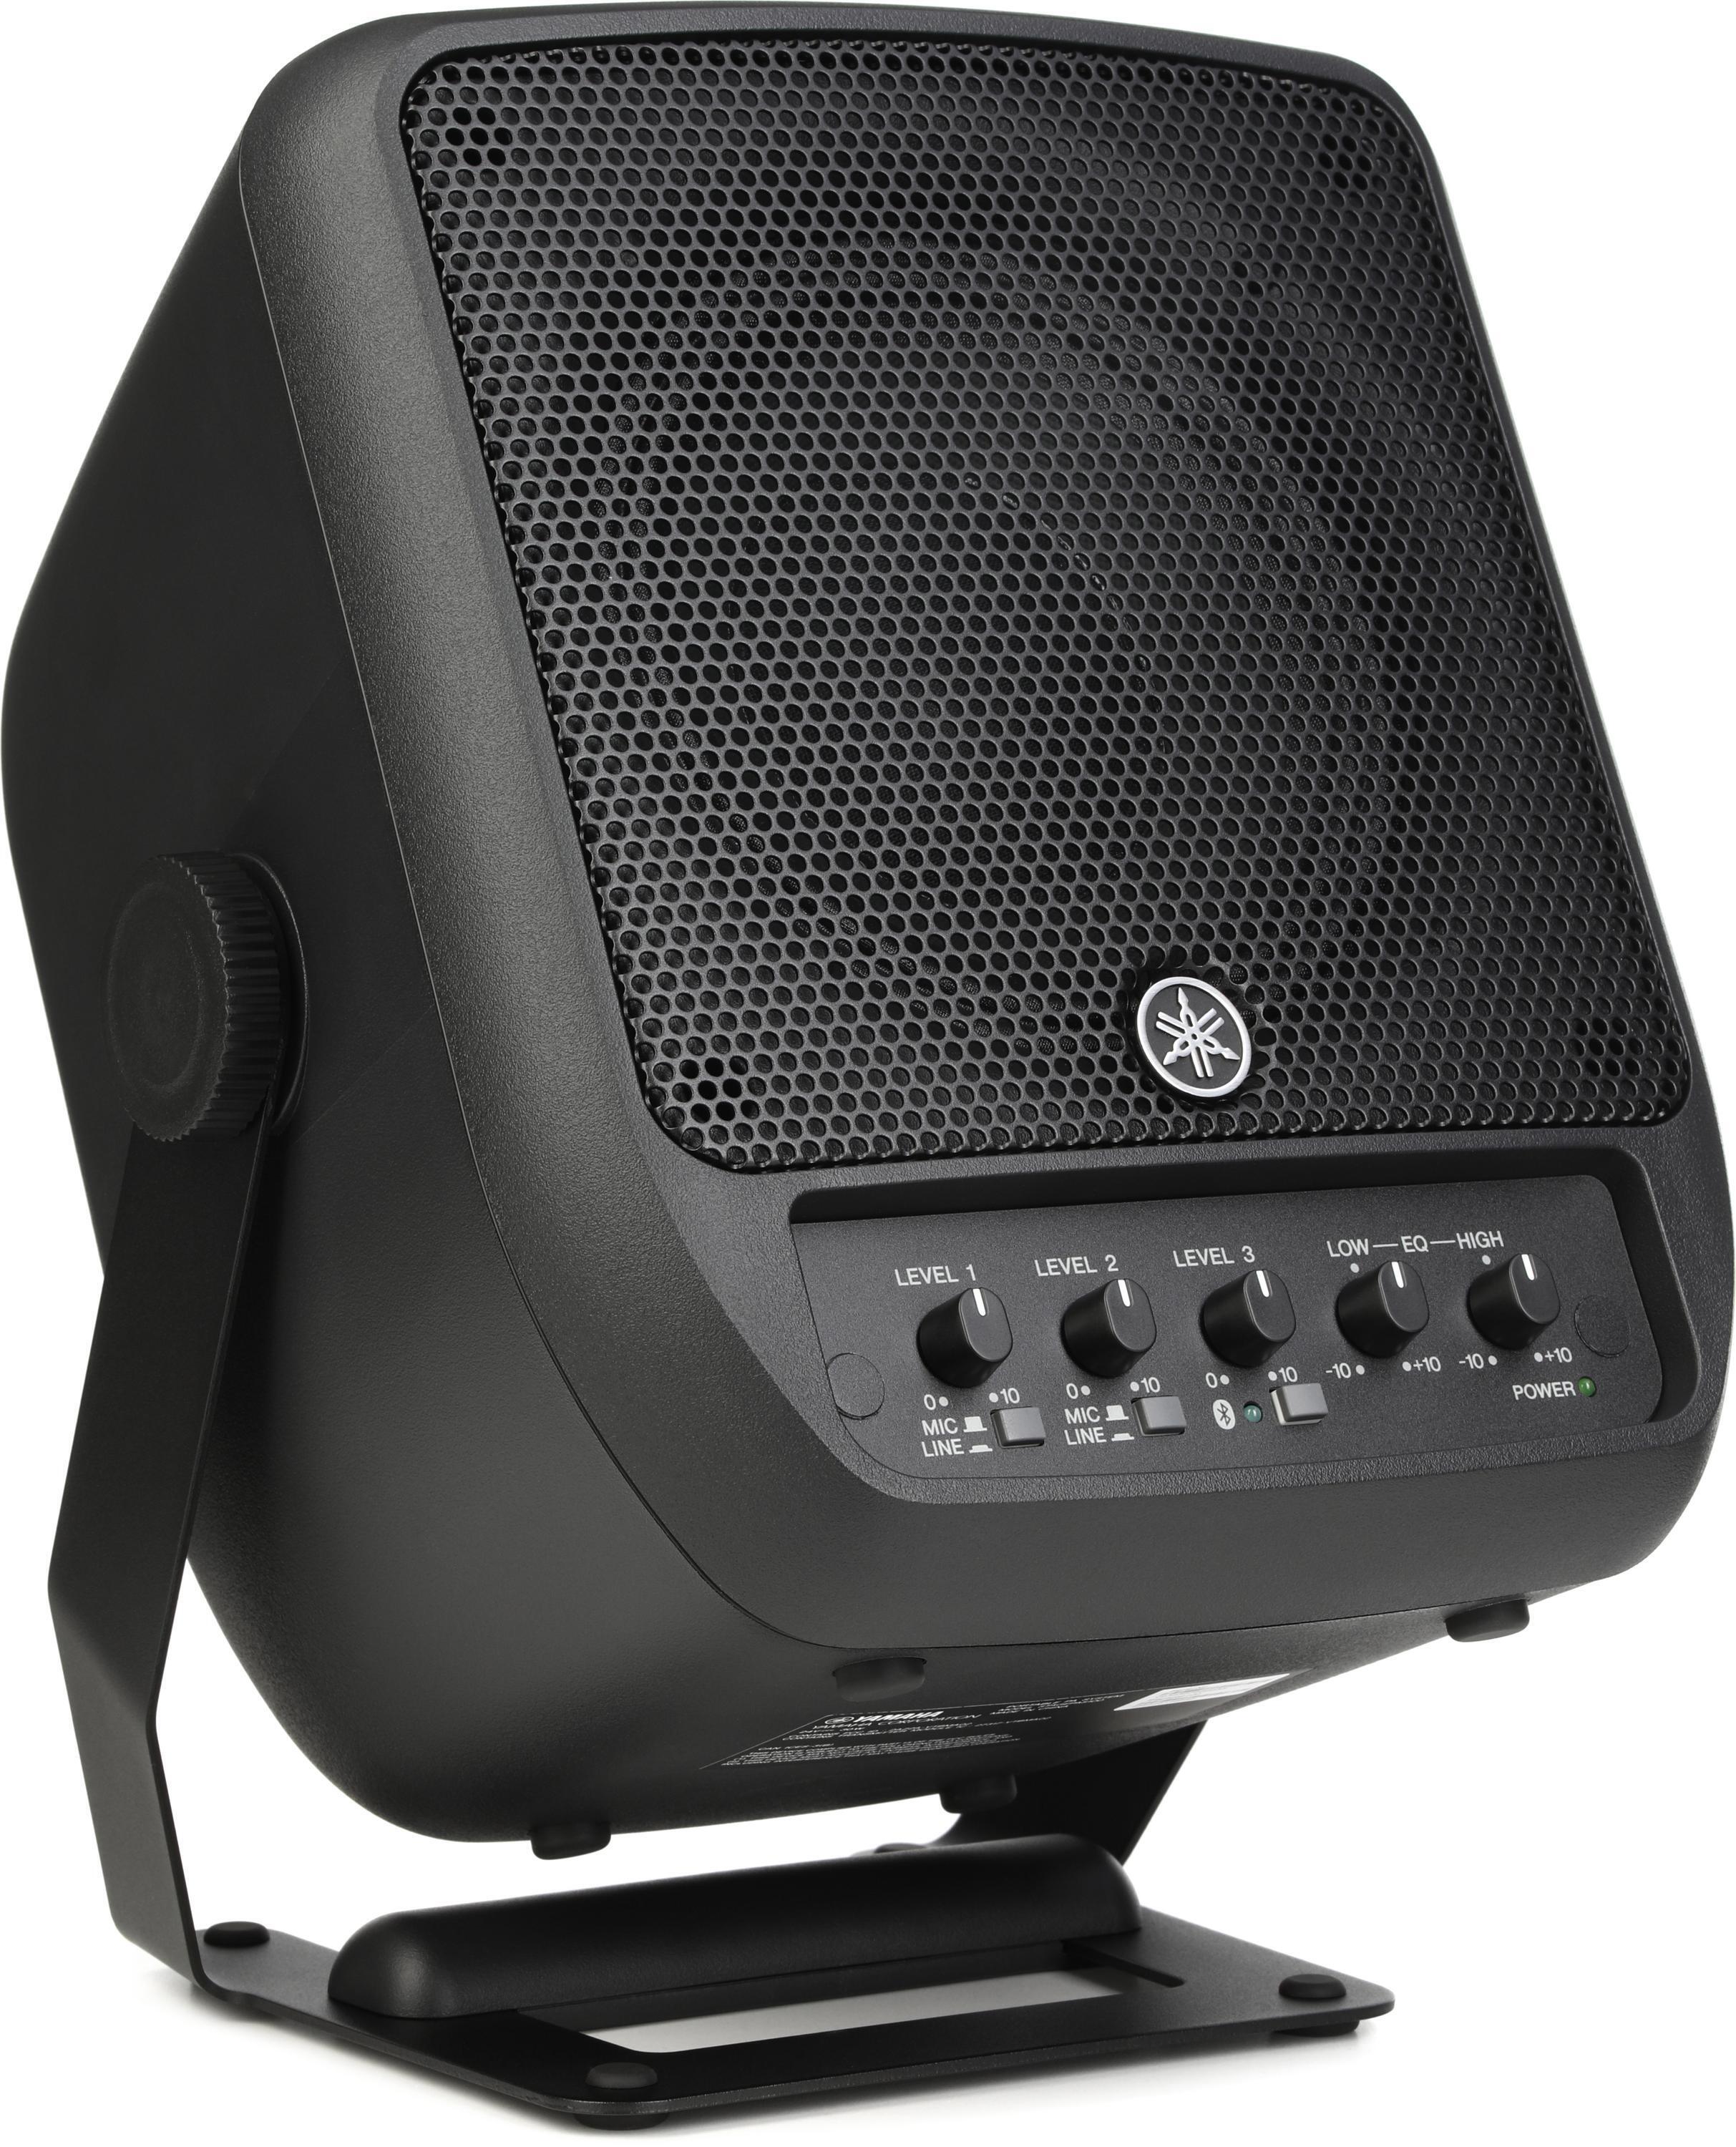 Bundled Item: Yamaha STAGEPAS 100 Portable PA System with Bluetooth